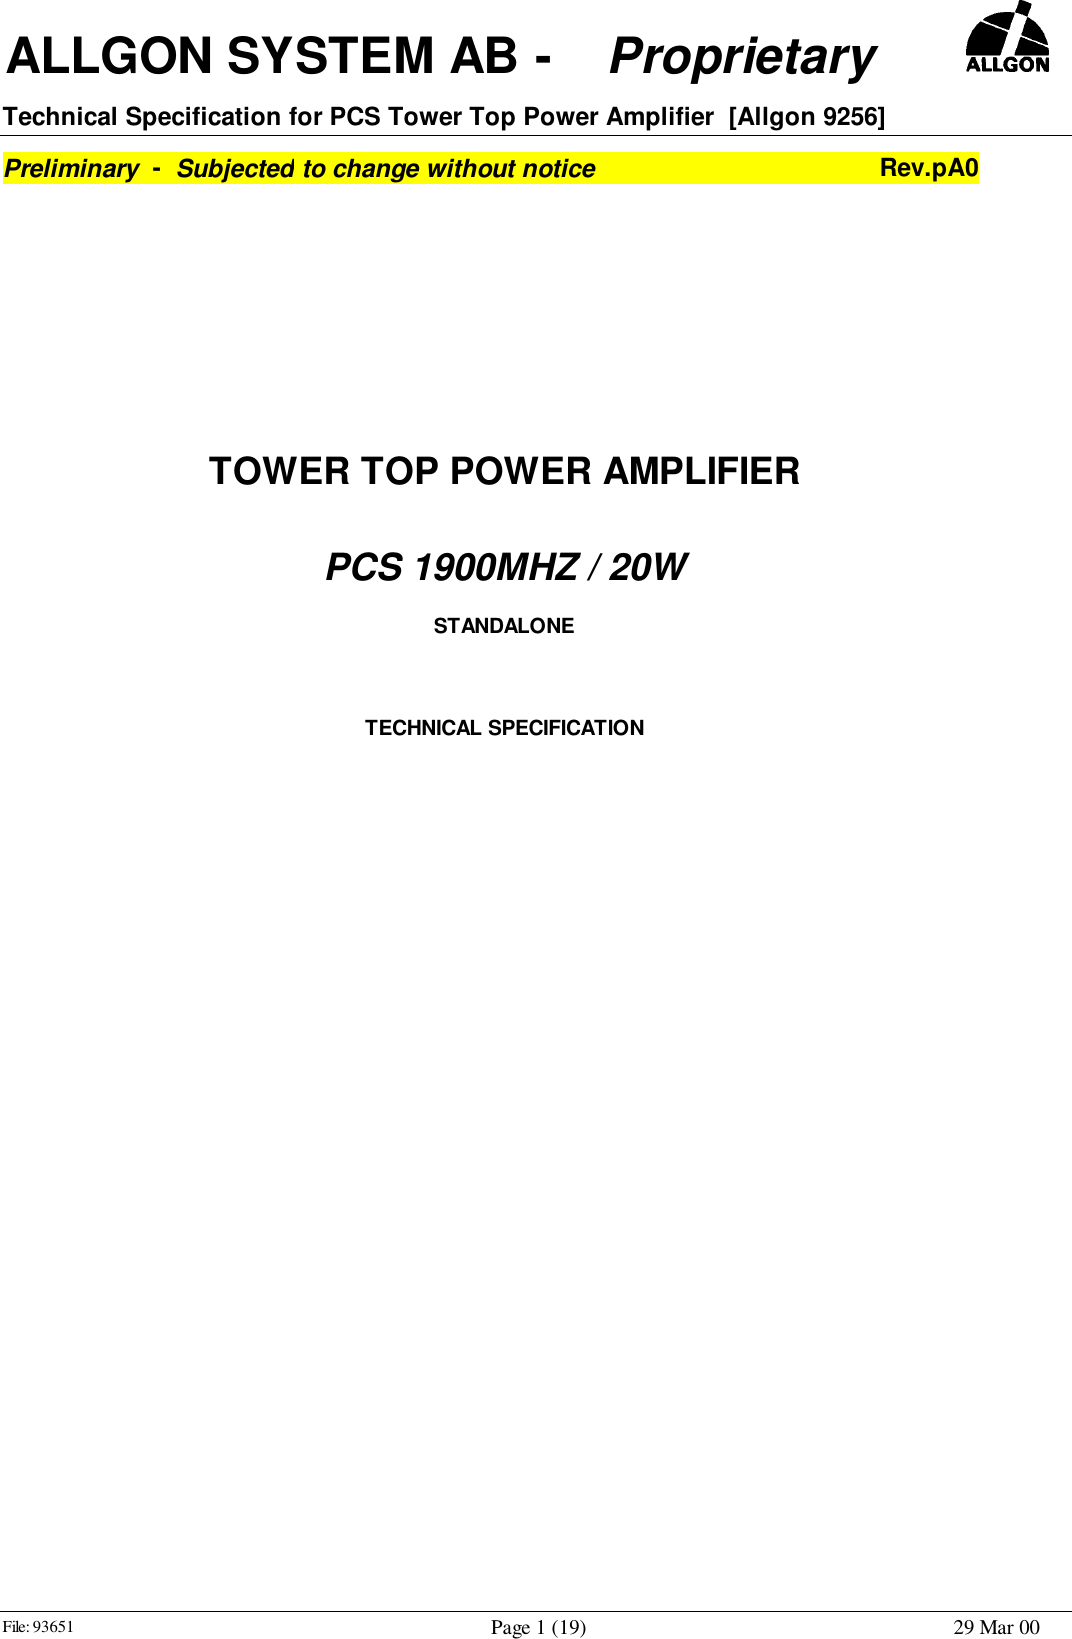  ALLGON SYSTEM AB -    Proprietary     Technical Specification for PCS Tower Top Power Amplifier  [Allgon 9256]Preliminary  -  Subjected to change without notice Rev.pA0File: 93651 Page 1 (19) 29 Mar 00TOWER TOP POWER AMPLIFIERPCS 1900MHZ / 20WSTANDALONETECHNICAL SPECIFICATION